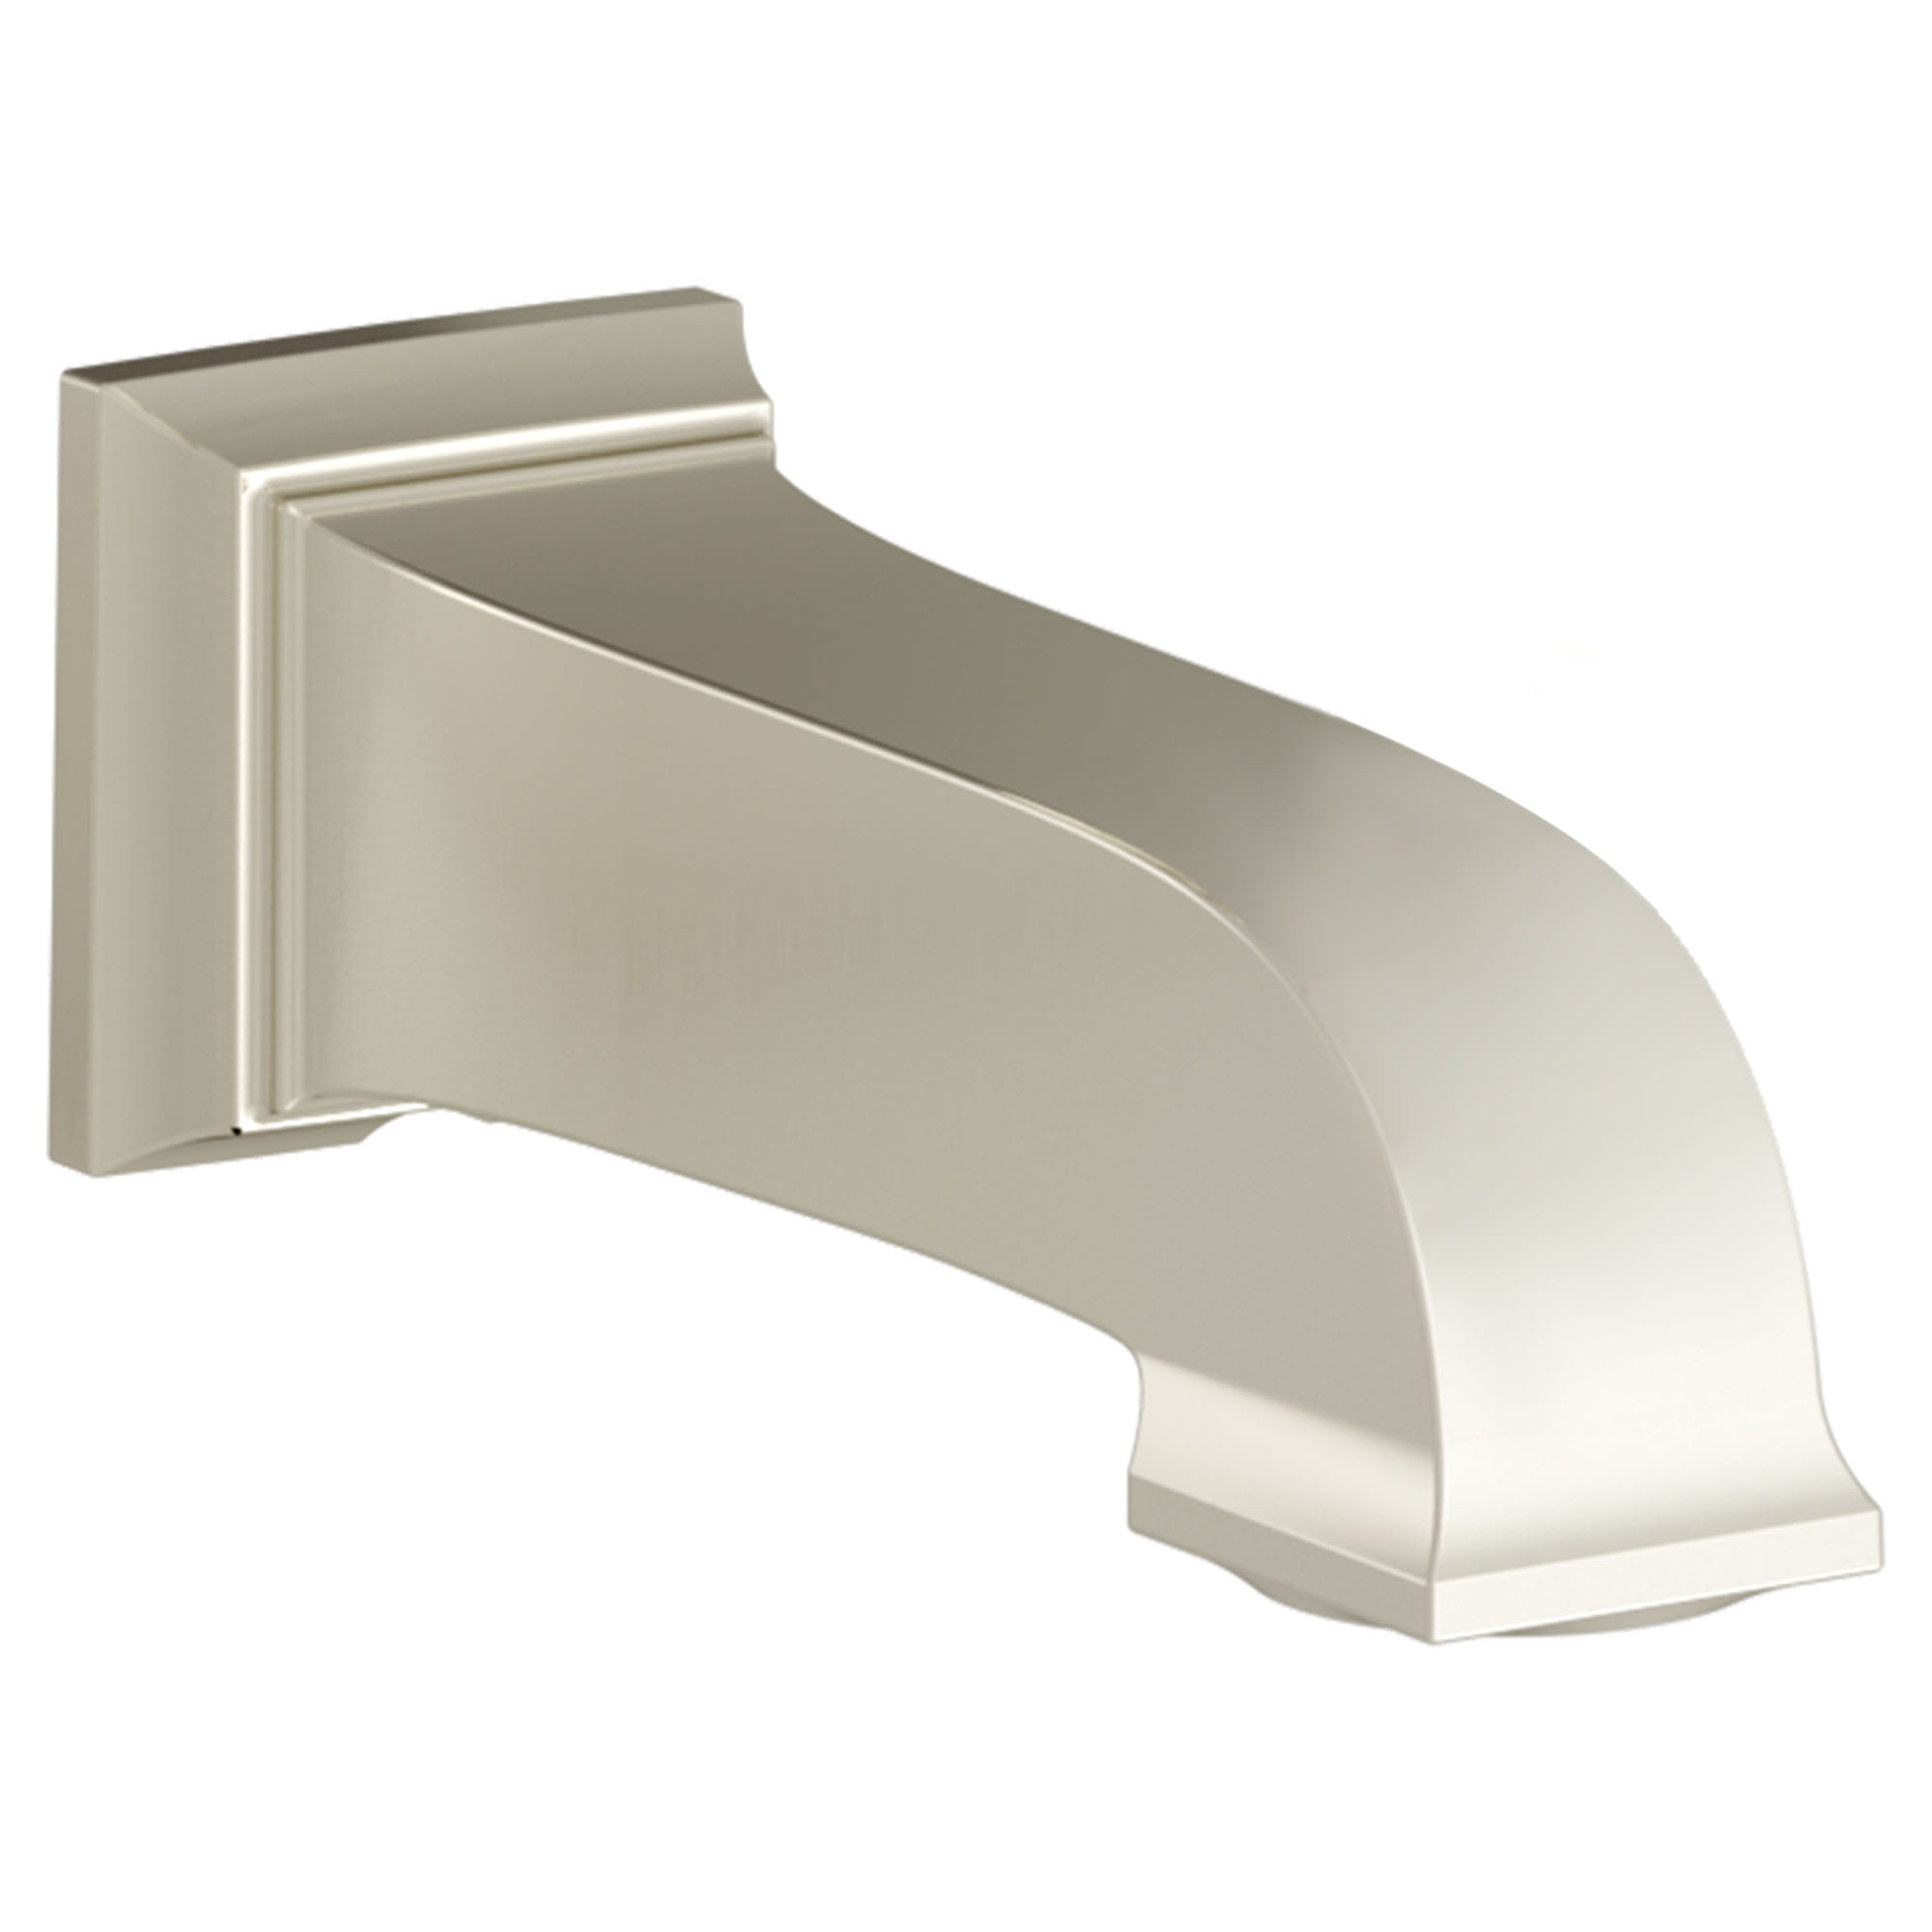 Town Square S 6 3 4 Inch Slip On Non Diverter Tub Spout POLISHED  NICKEL